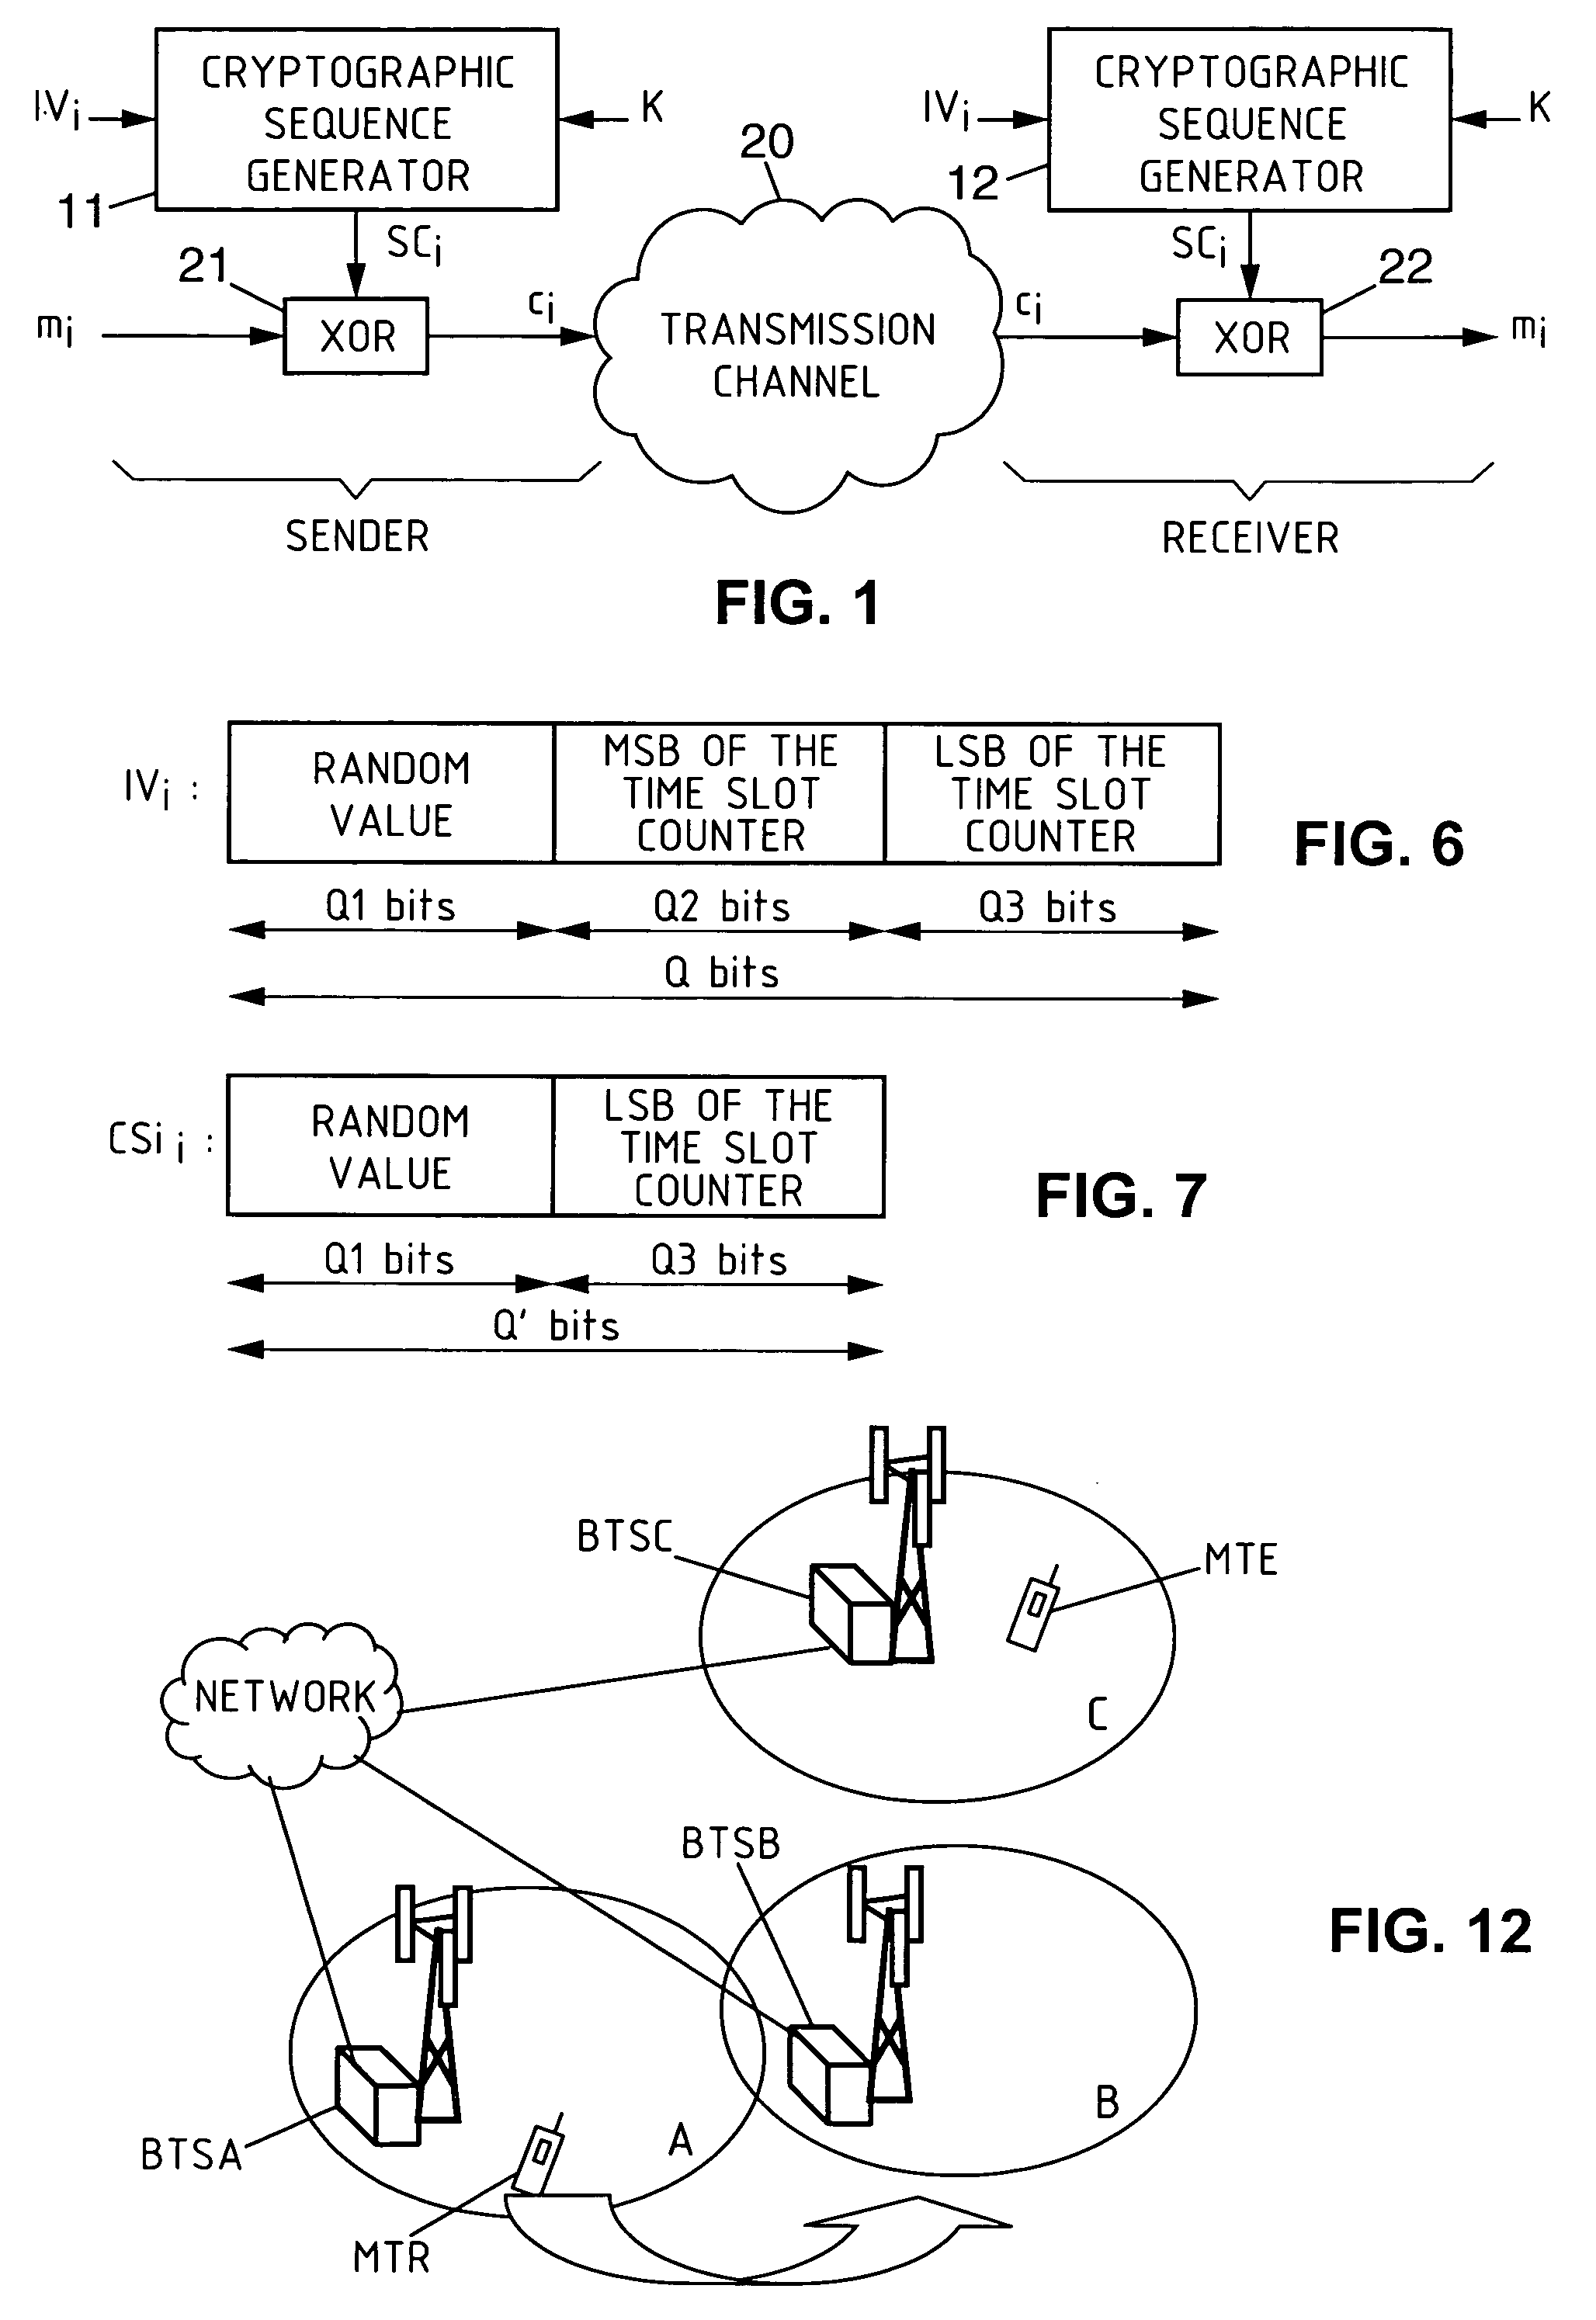 Method for transmitting encrypted data, associated decrypting method, device for carrying out said methods and a mobile terminal for the incorporation thereof